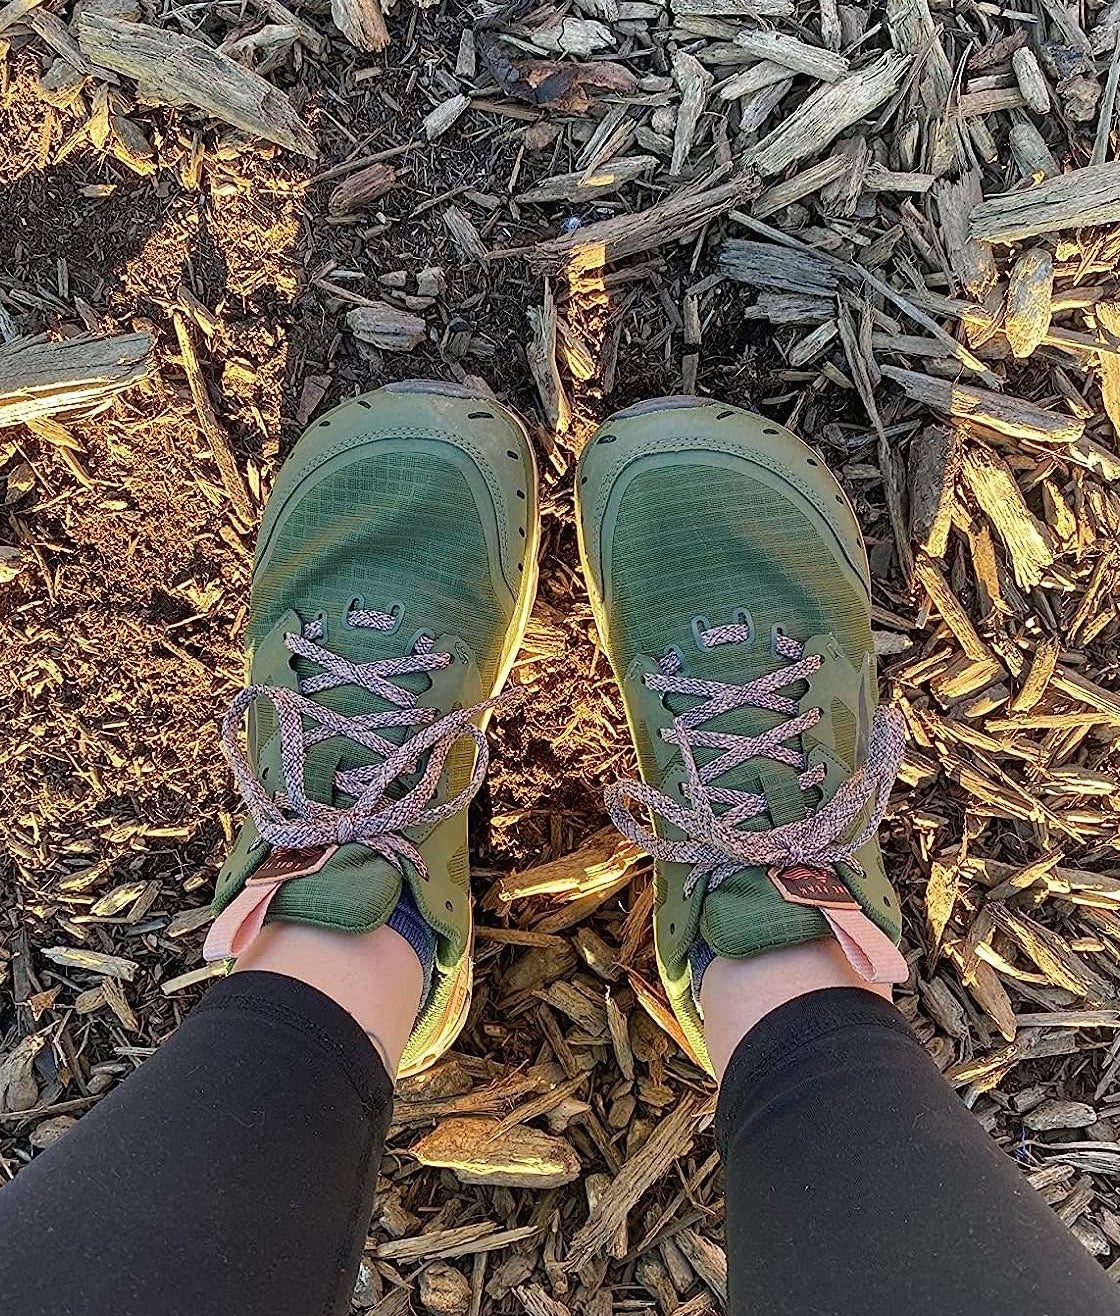 reviewer in green and pink alrea trail runners witha. wide toe box